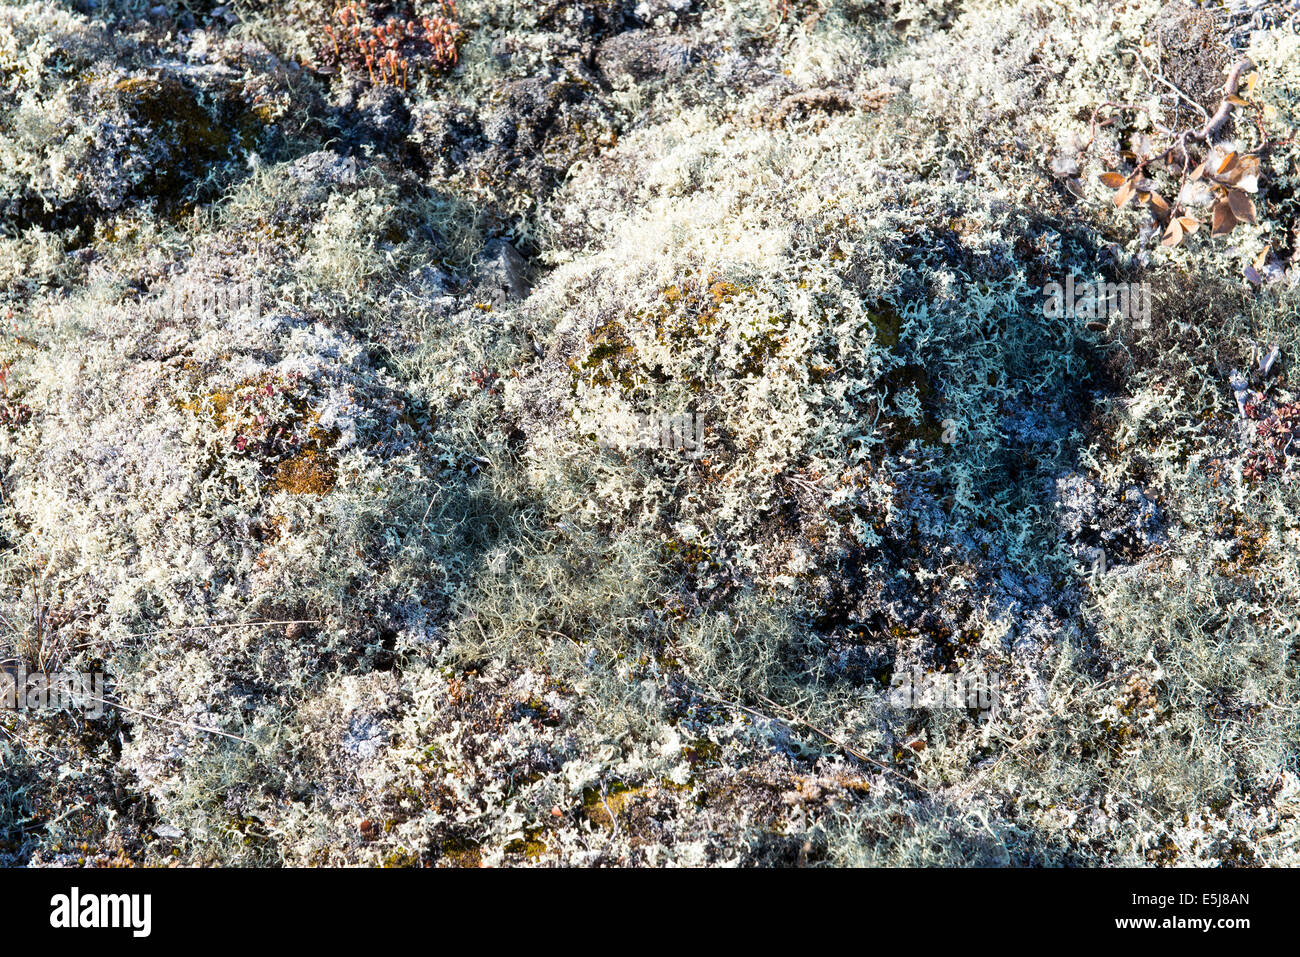 Arctic vegetation on Greenland in summer with lichen, moss and other plants Stock Photo